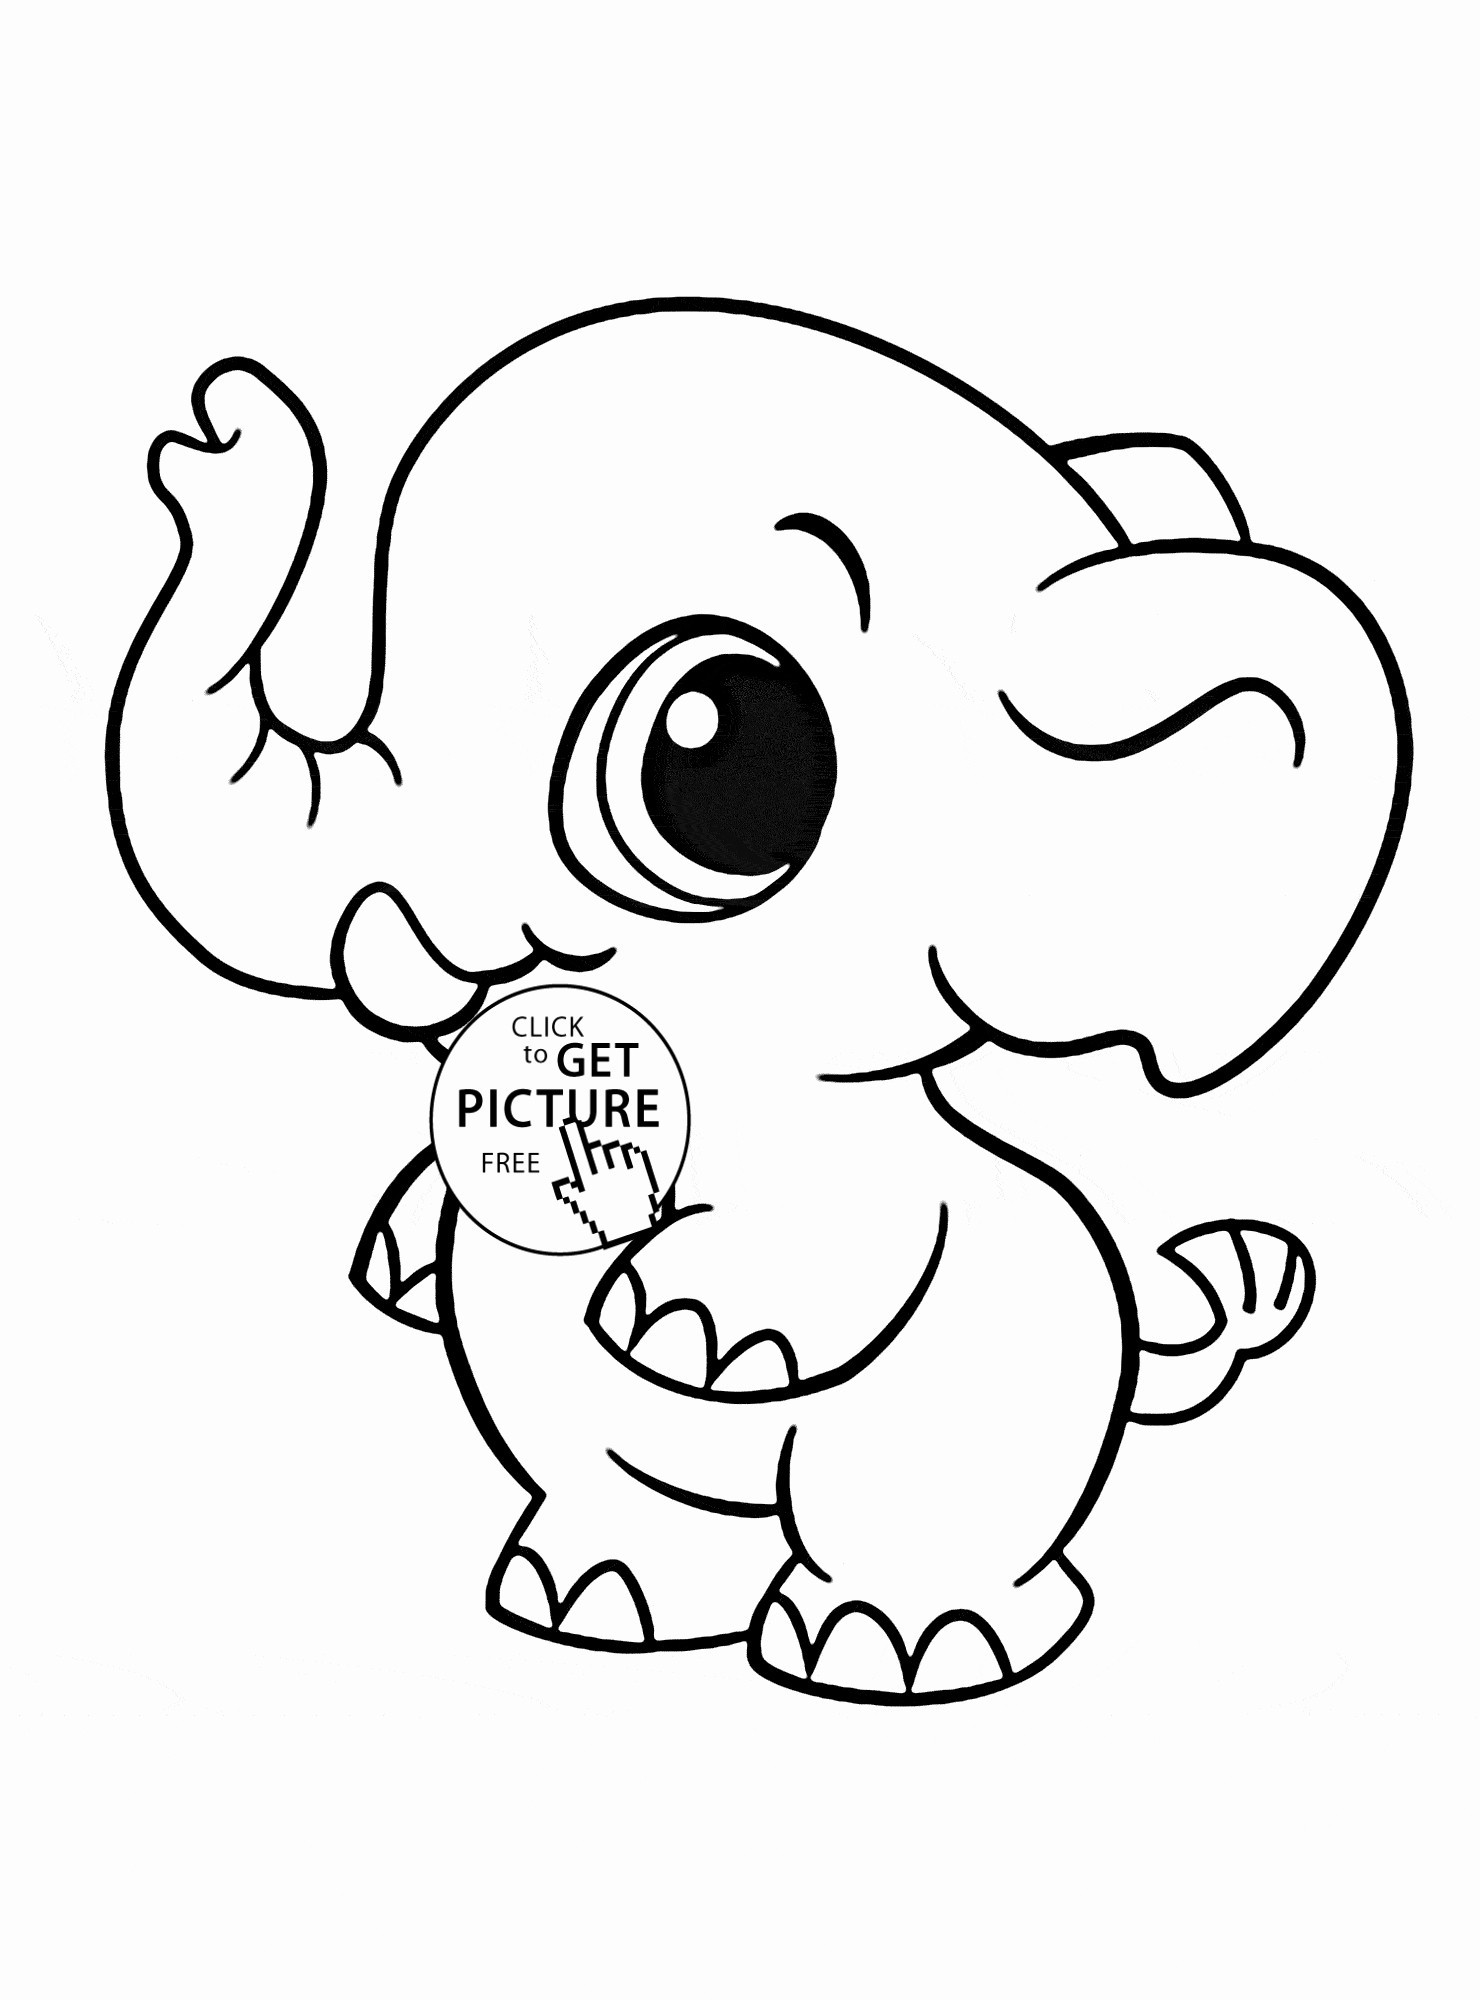 animal coloring sheet animal coloring pages for kids beautiful coloring pages that are printable elegant drawing printables 0d ruva